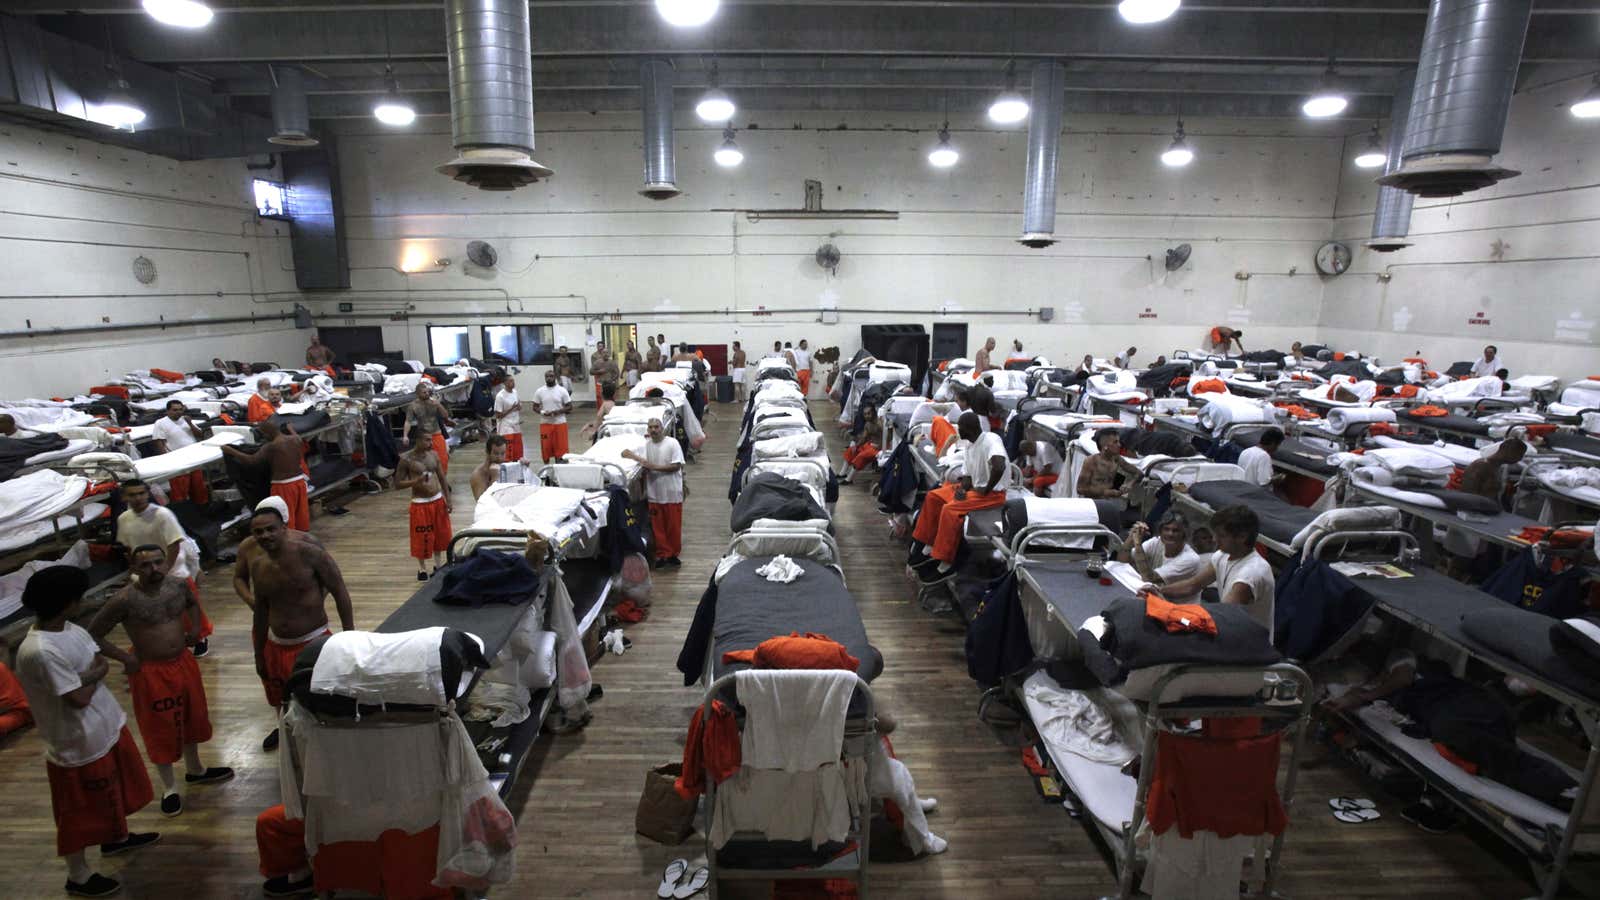 Overcrowding forced thousands of prisoners to sleep in gyms and other spaces.